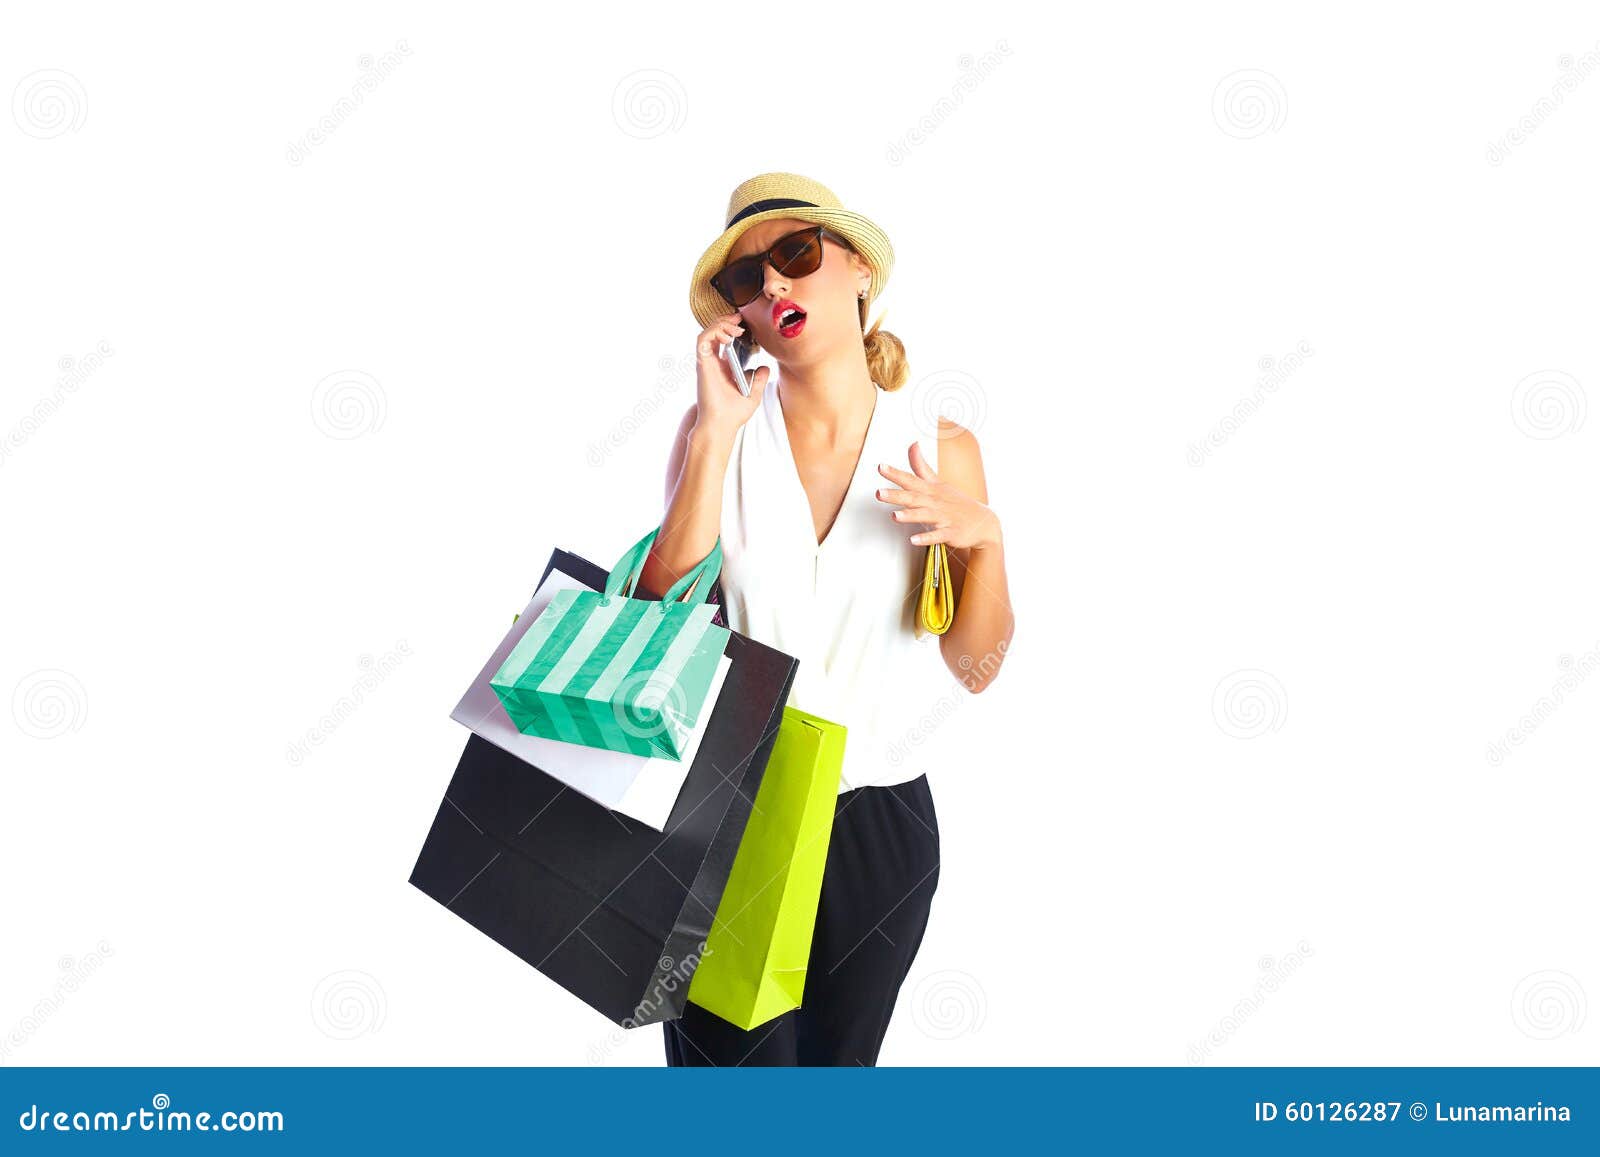 blond shopaholic woman bags and smartphone